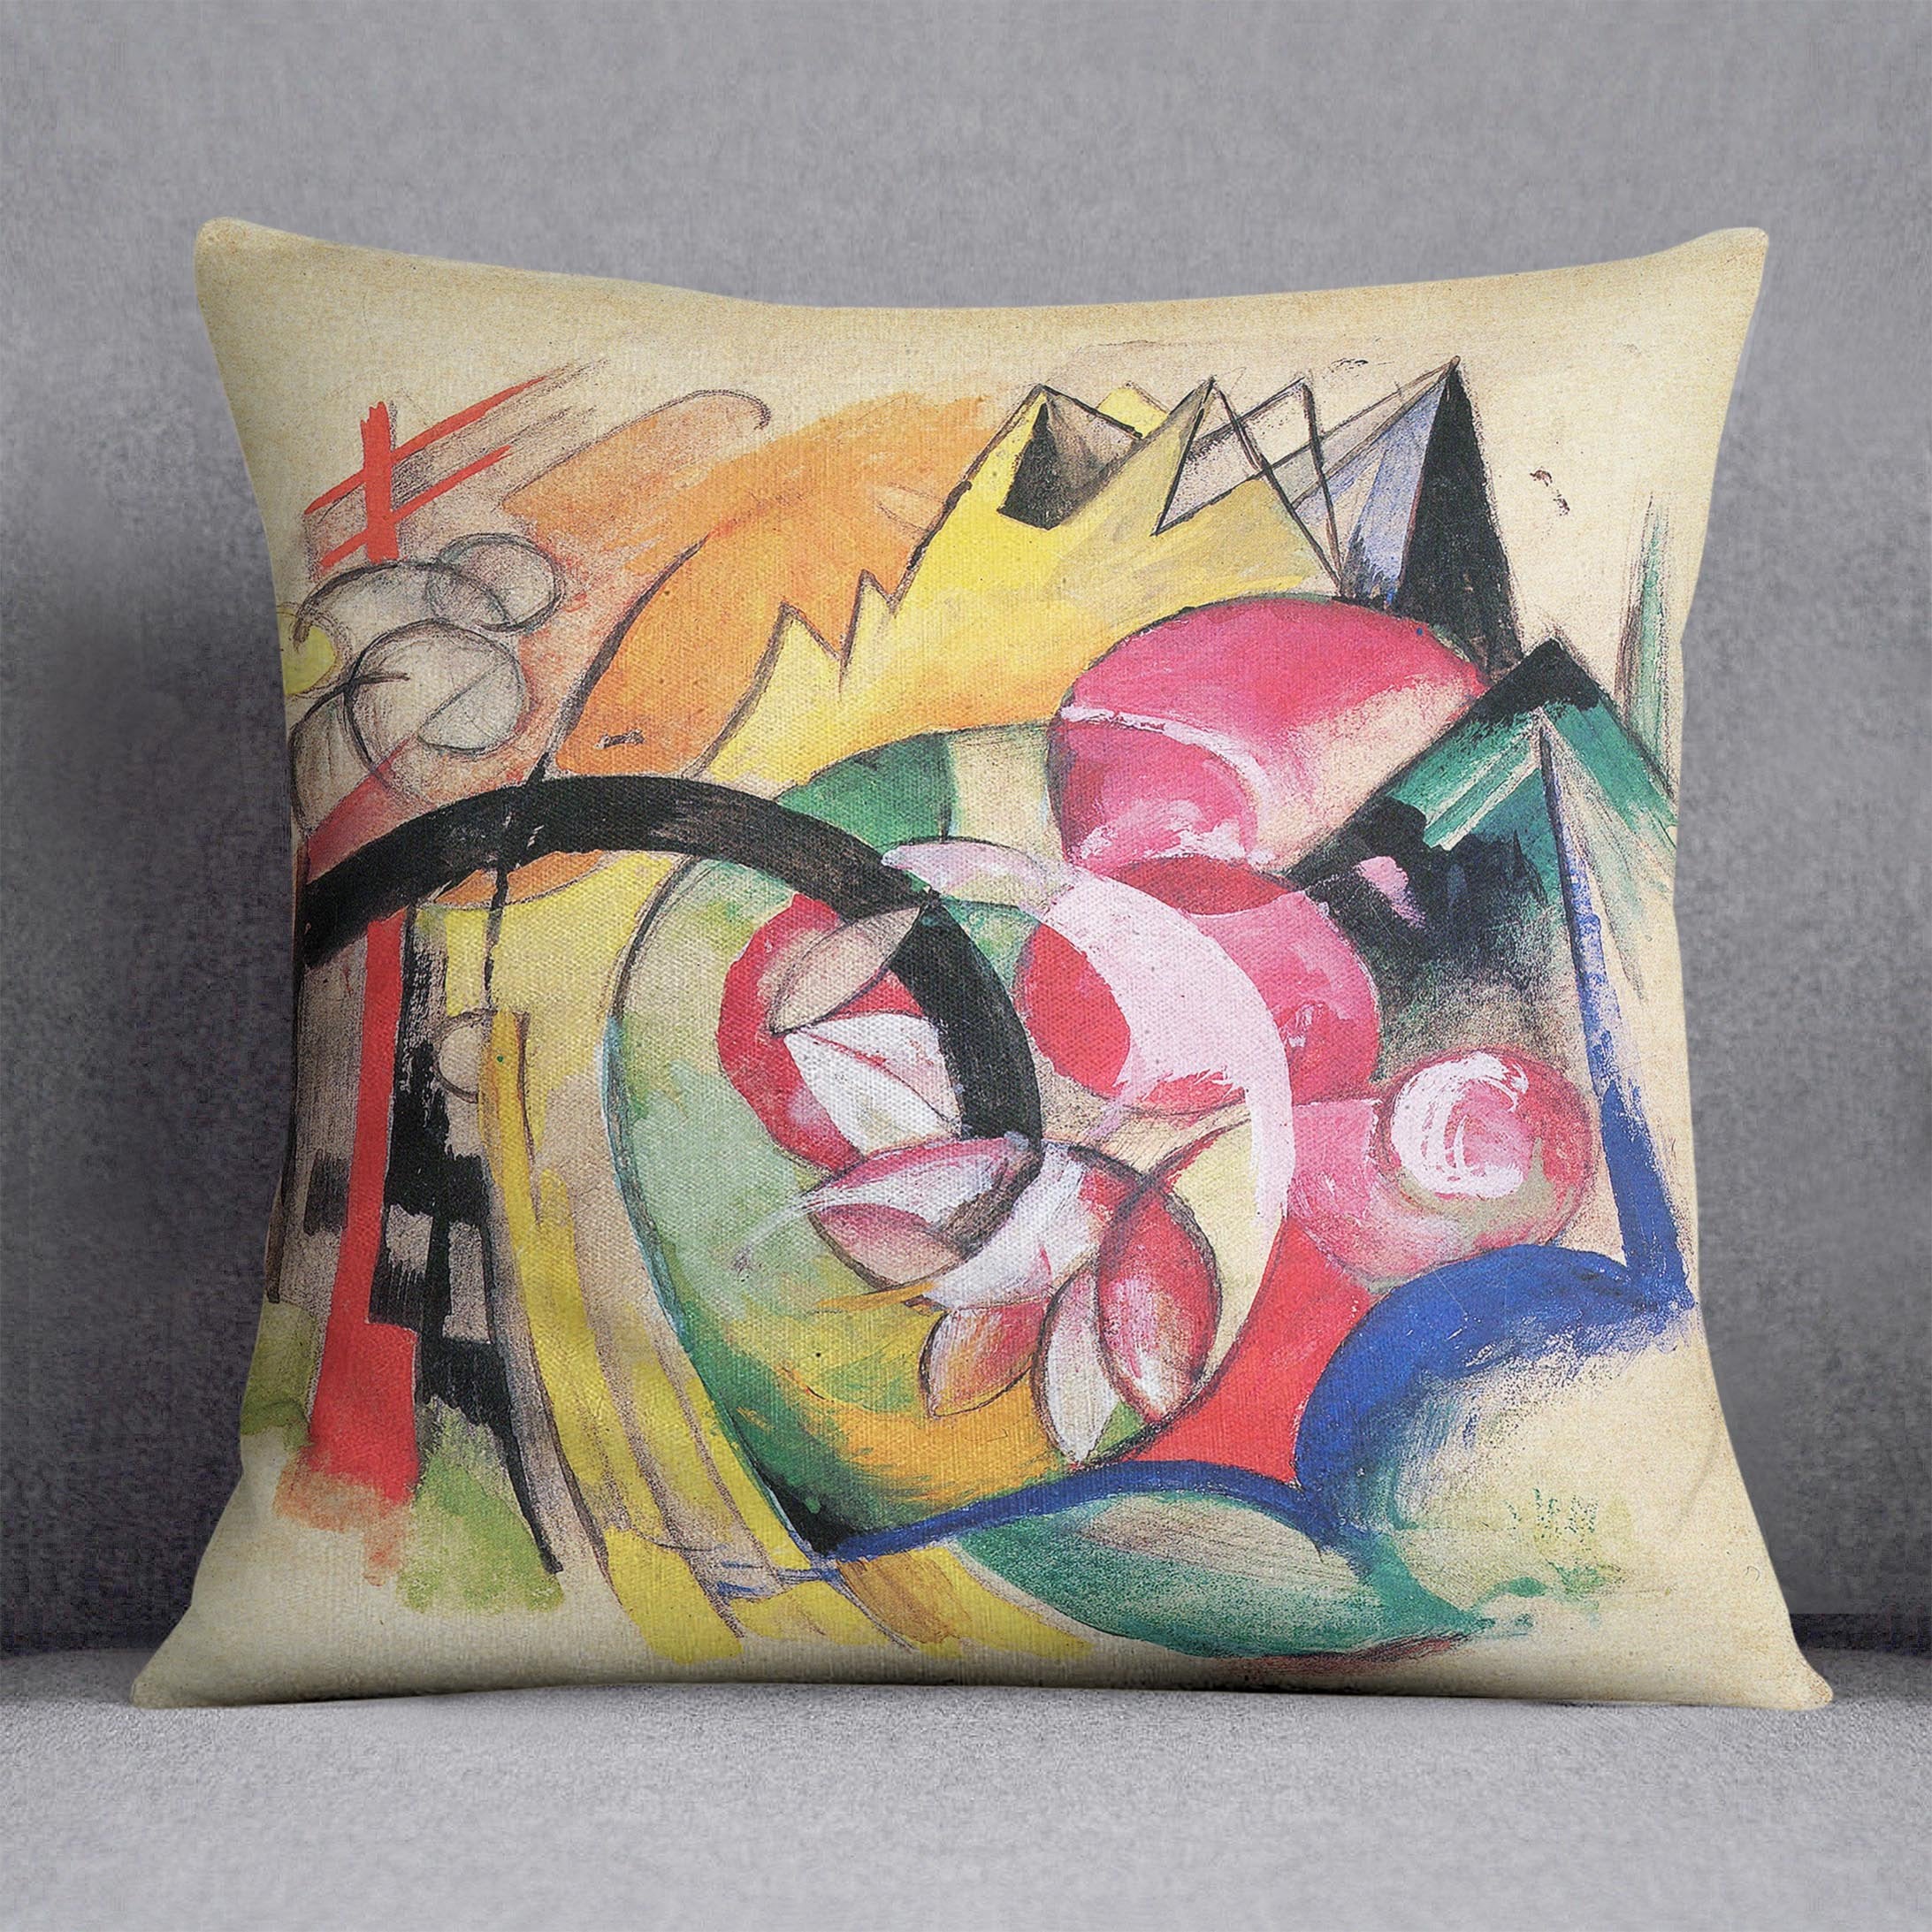 Colored flowers by Franz Marc Throw Pillow